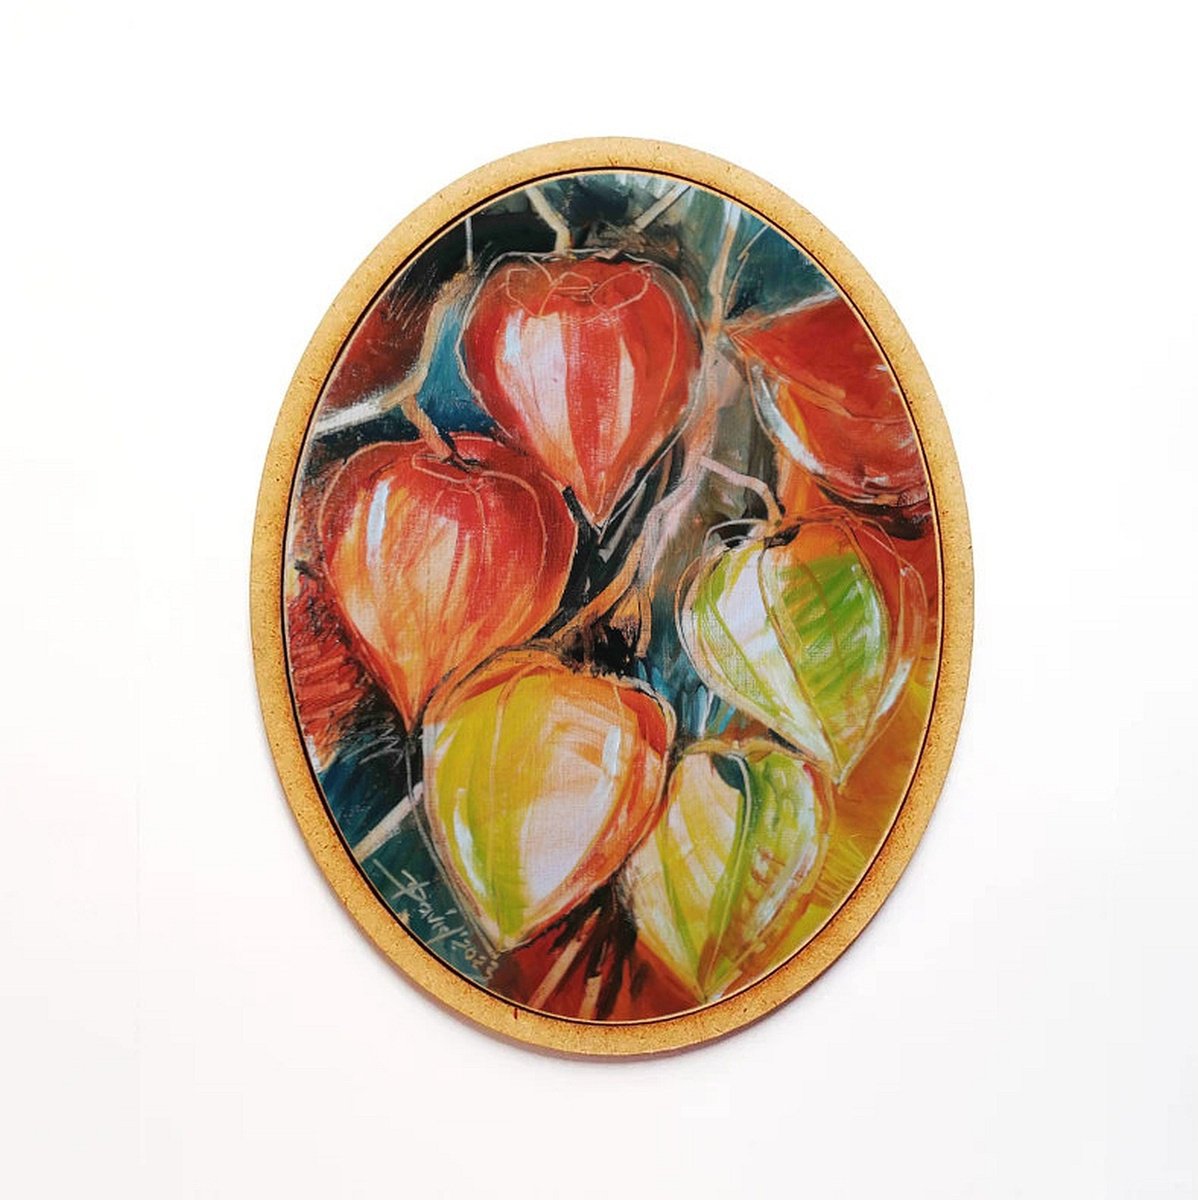 Physalis in oval-shaped by Olga David